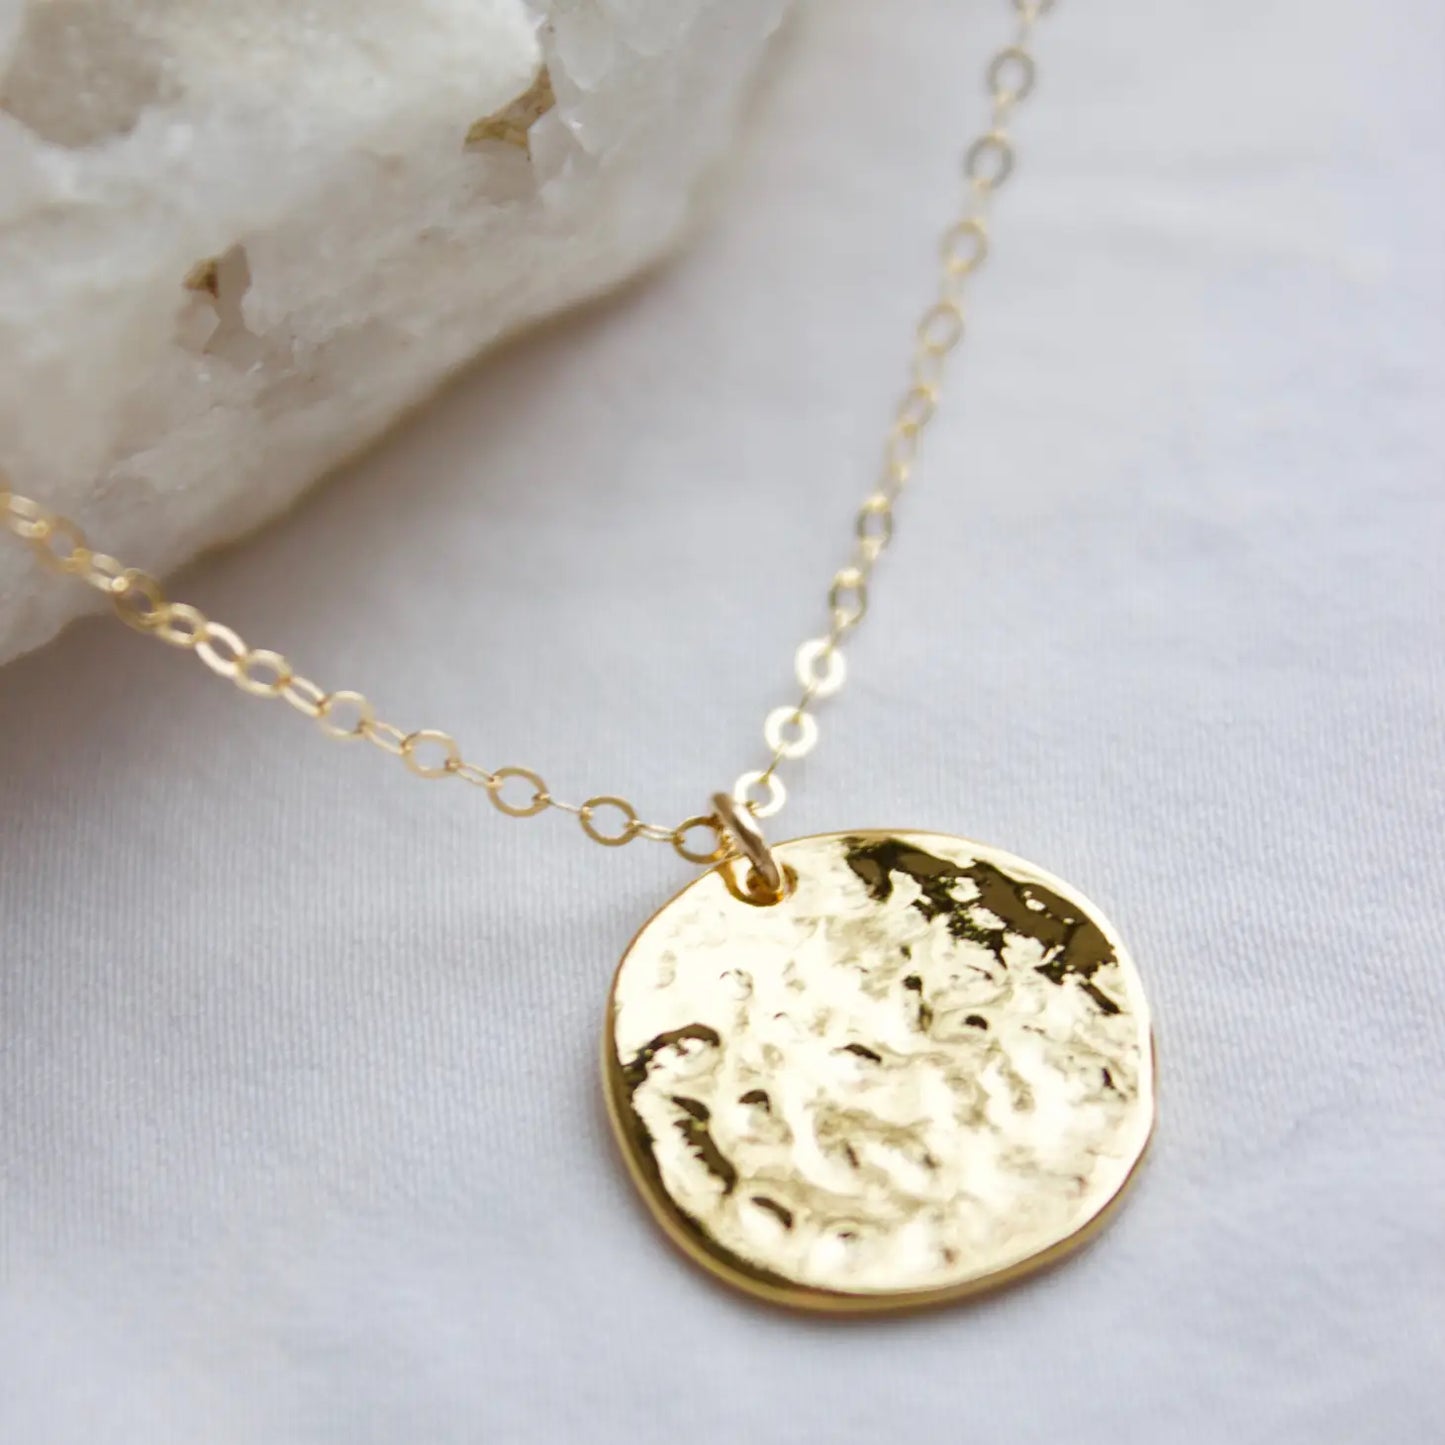 Pounded Disk Necklace